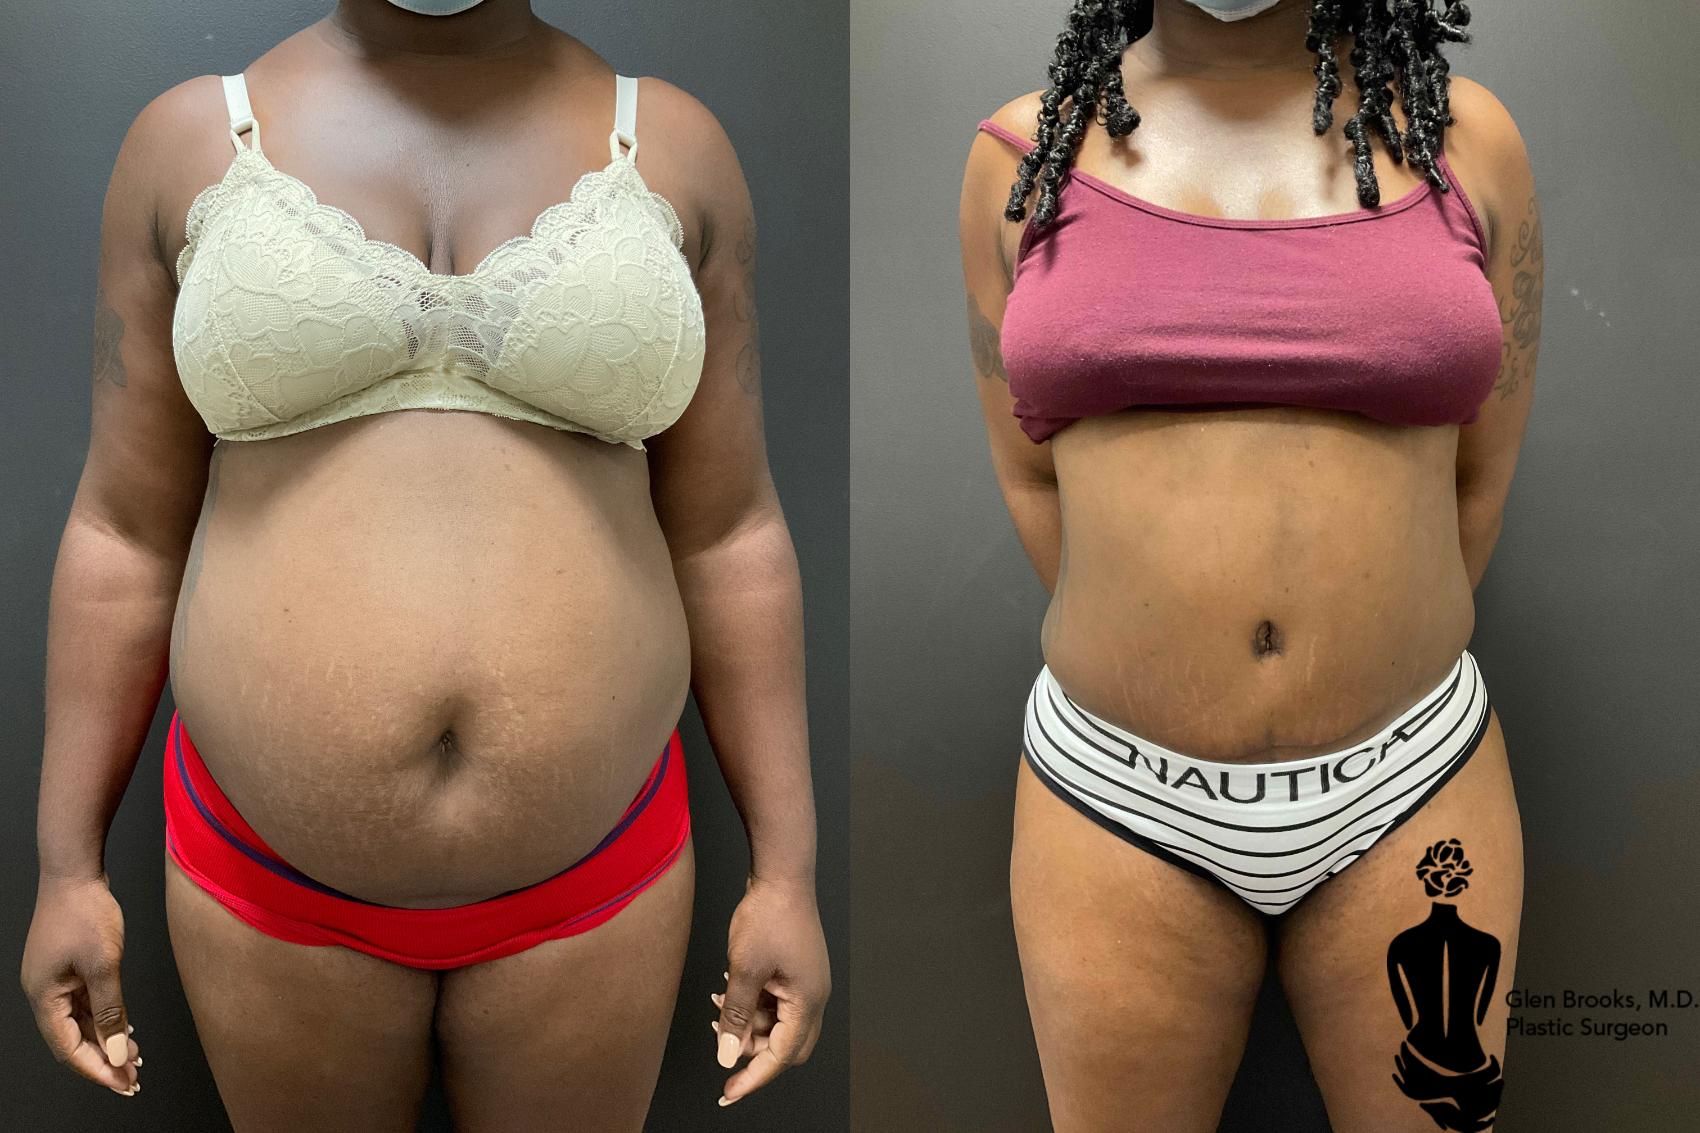 38 year old female from Springfield area, 5'4", 176 lbs.  Abdominoplasty with rectus diastasis repair to address mild excess skin of the lower abdomen and moderate amounts of excess fat of the upper and lower abdomen.